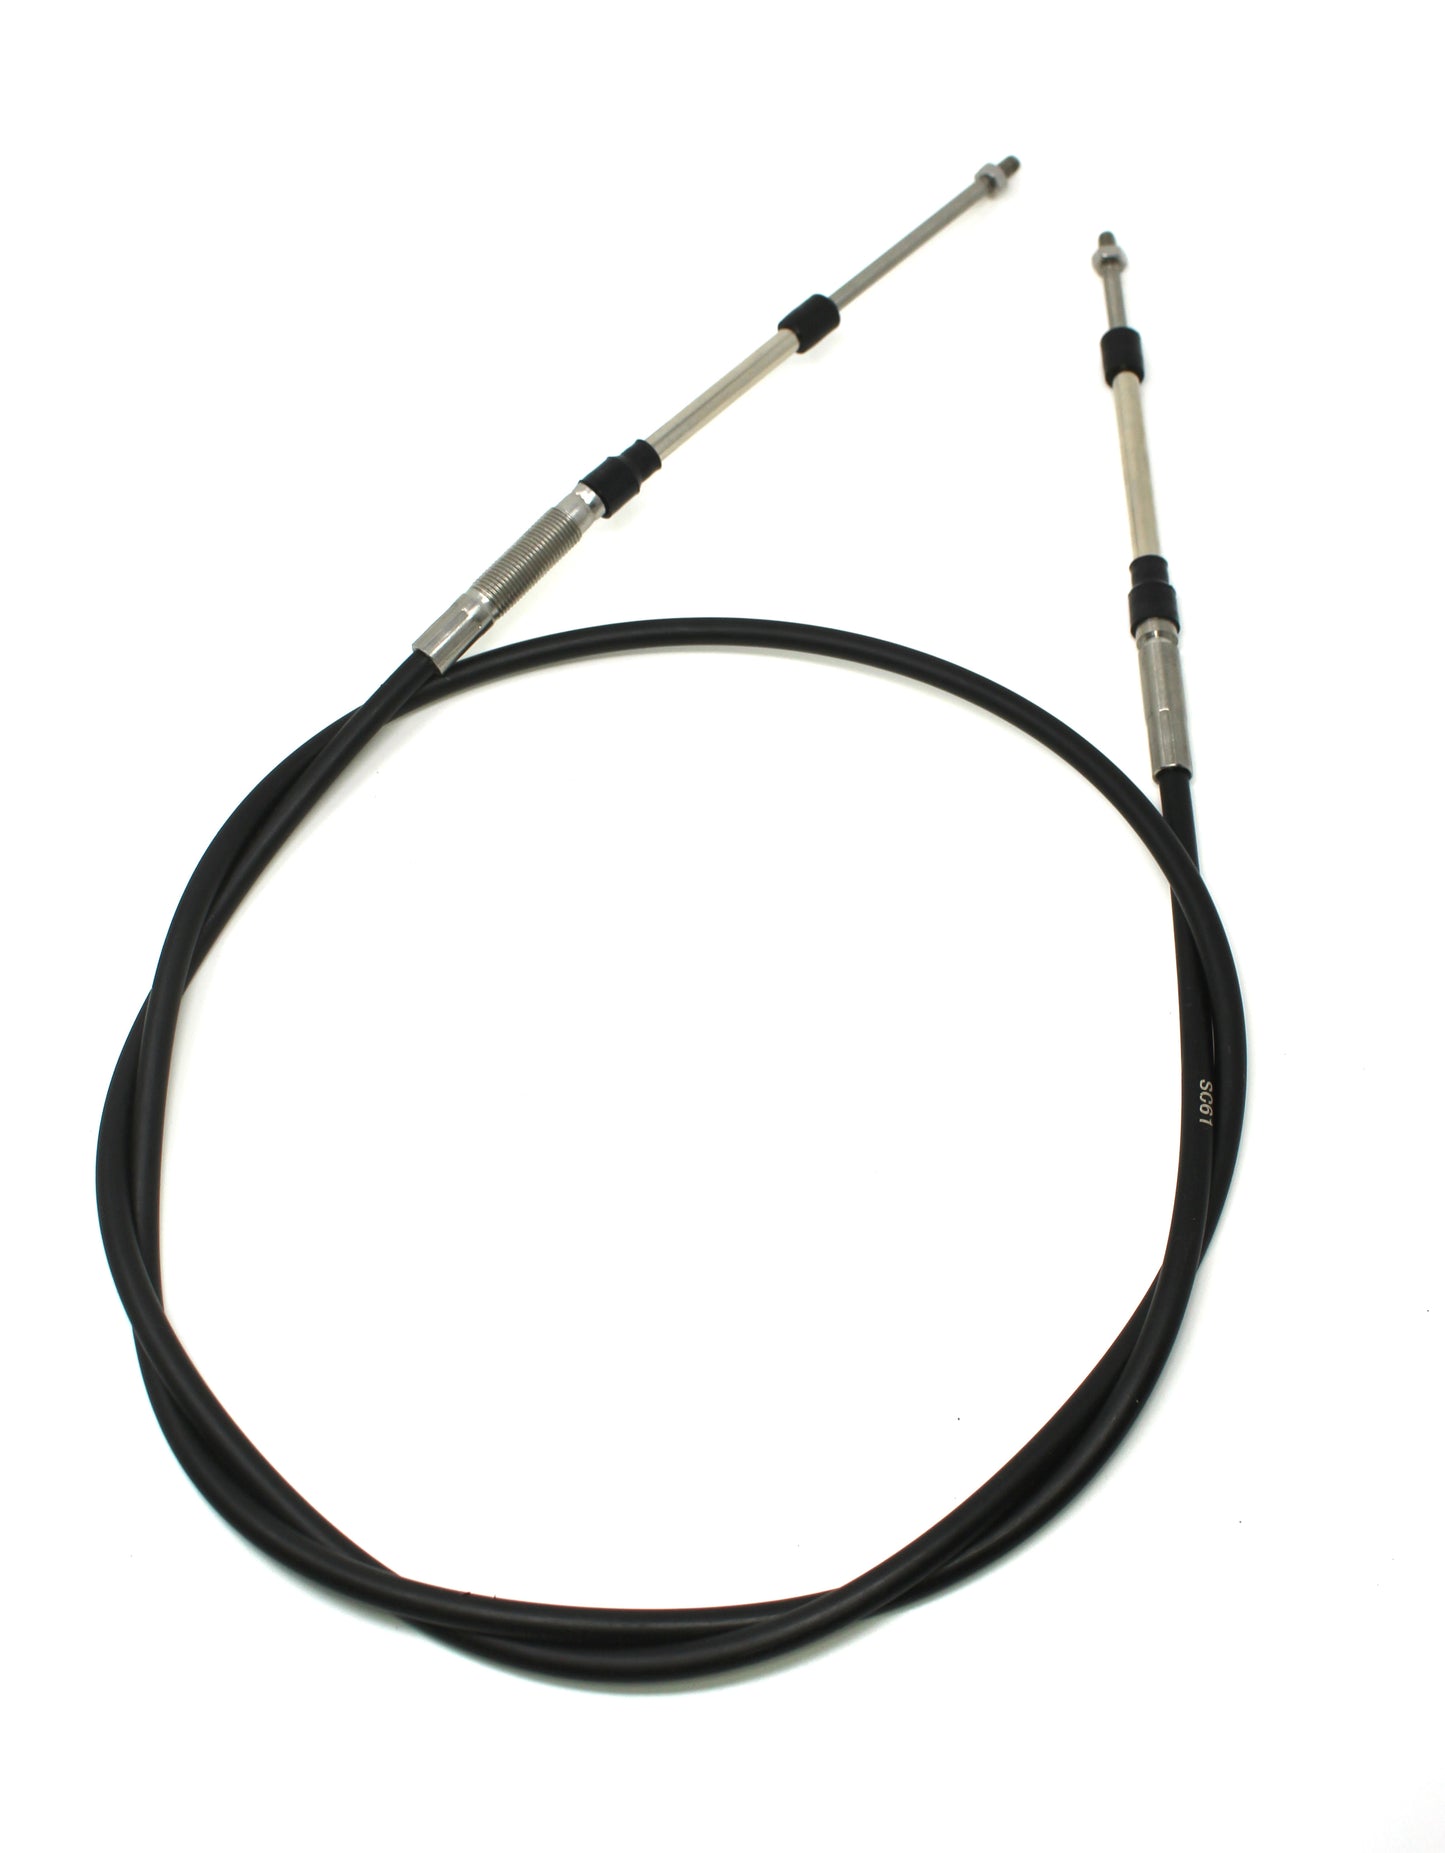 Aftermarket Steering Cable Replacement for Seadoo 99-11 GTX GTI fits 277000843 277001474 277001580  277001010  277001532  277001322  002-045-08  26-3128 JSP Brand